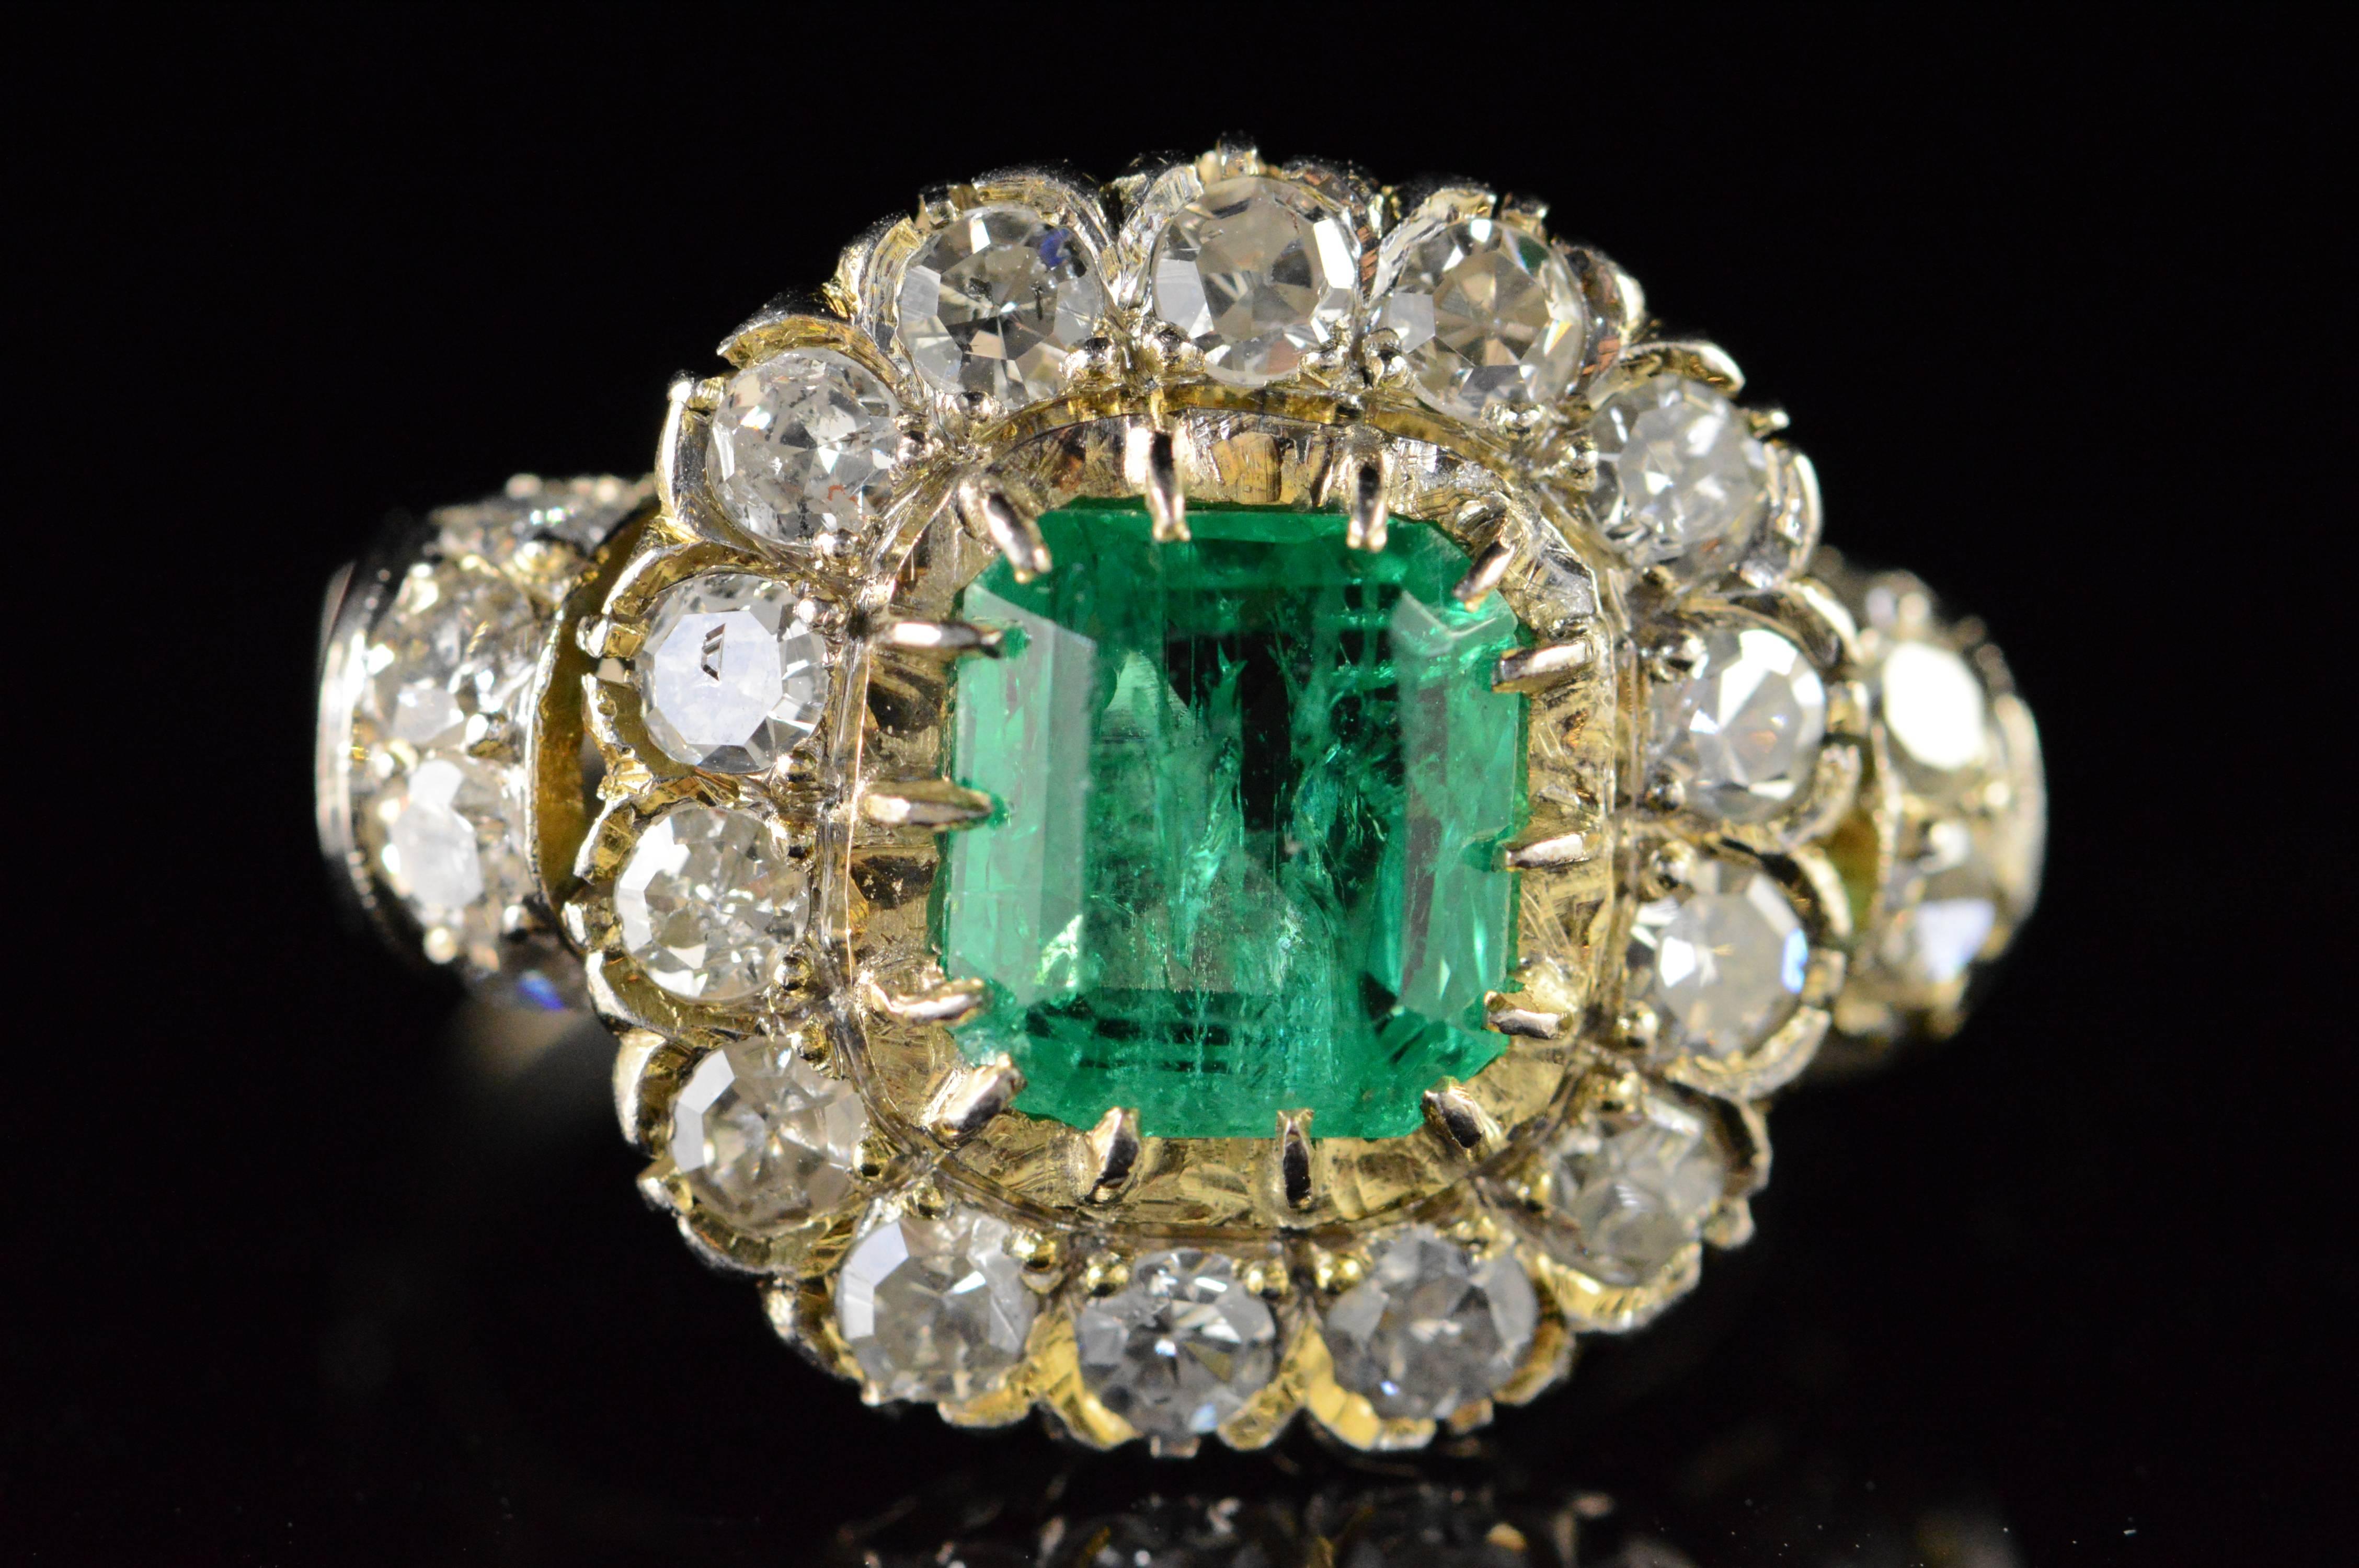 This beautiful handcrafted emerald and diamond ring was created is a fine example of the Victorian era’s style and allure.

·Item: 18K Vic 1.68 CT Emerald 1.32 CTW Mine Cut Diamond Ring - Size 6.75 / White Gold

·Composition: 18k Gold Acid